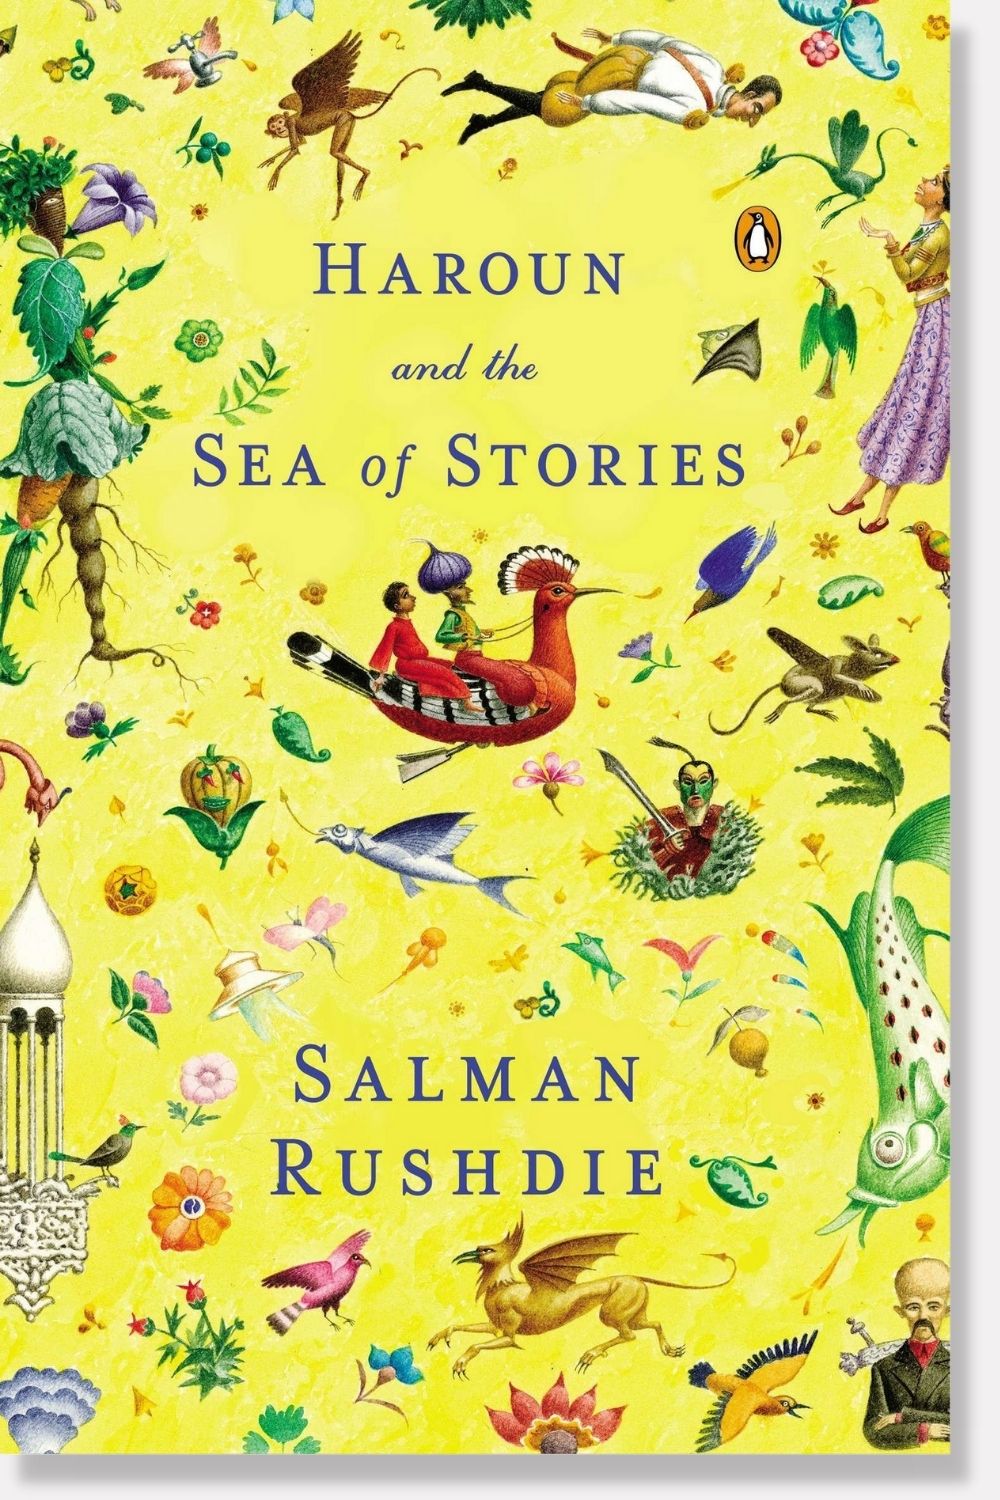 Haroun and the Sea of Stories by Salman Rushdie - book cover